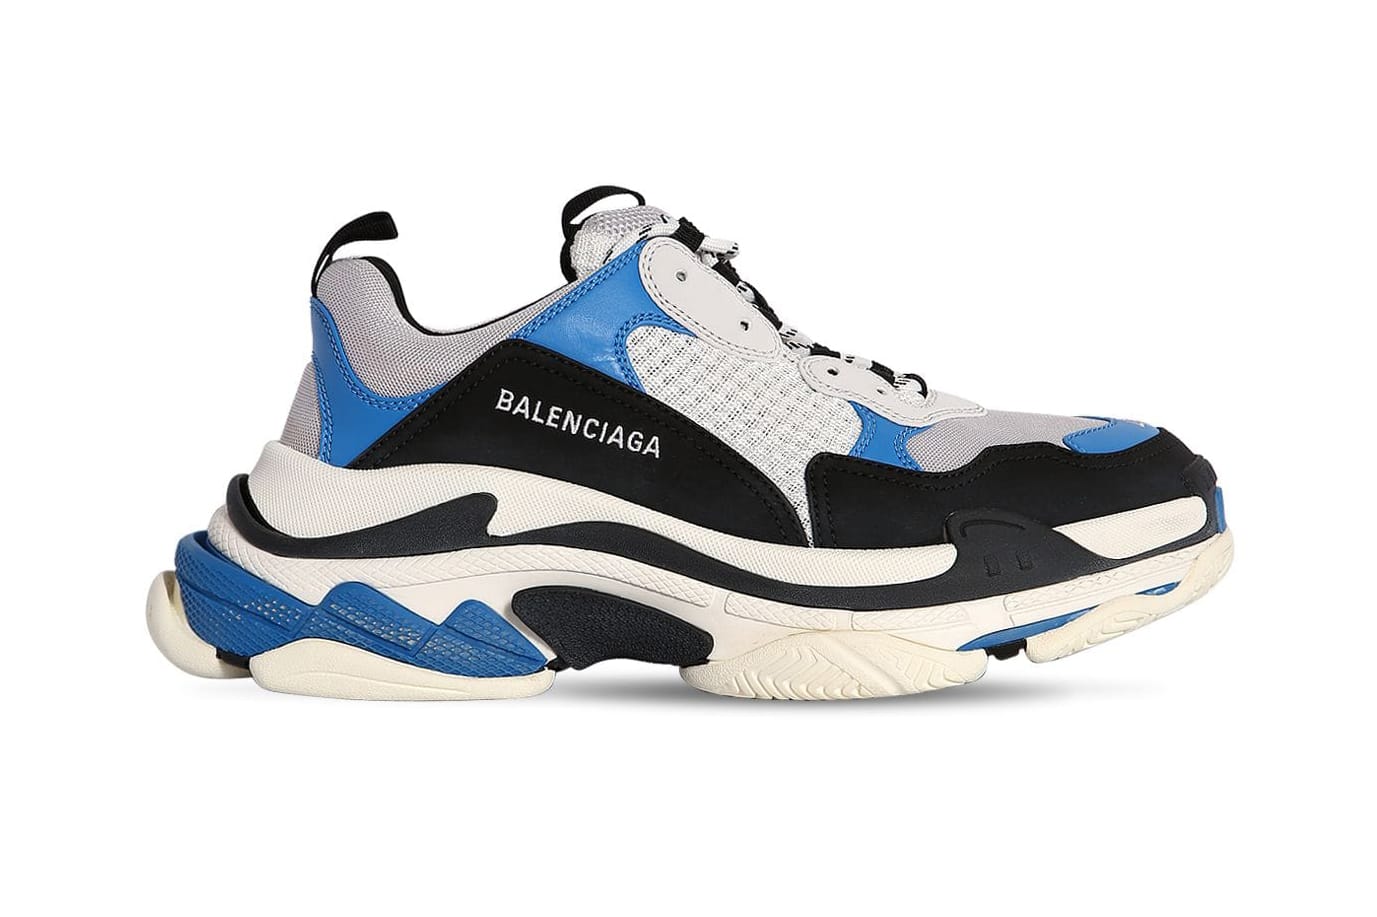 Balenciaga Black and red Triple S Sneakers $950 Buy AW18